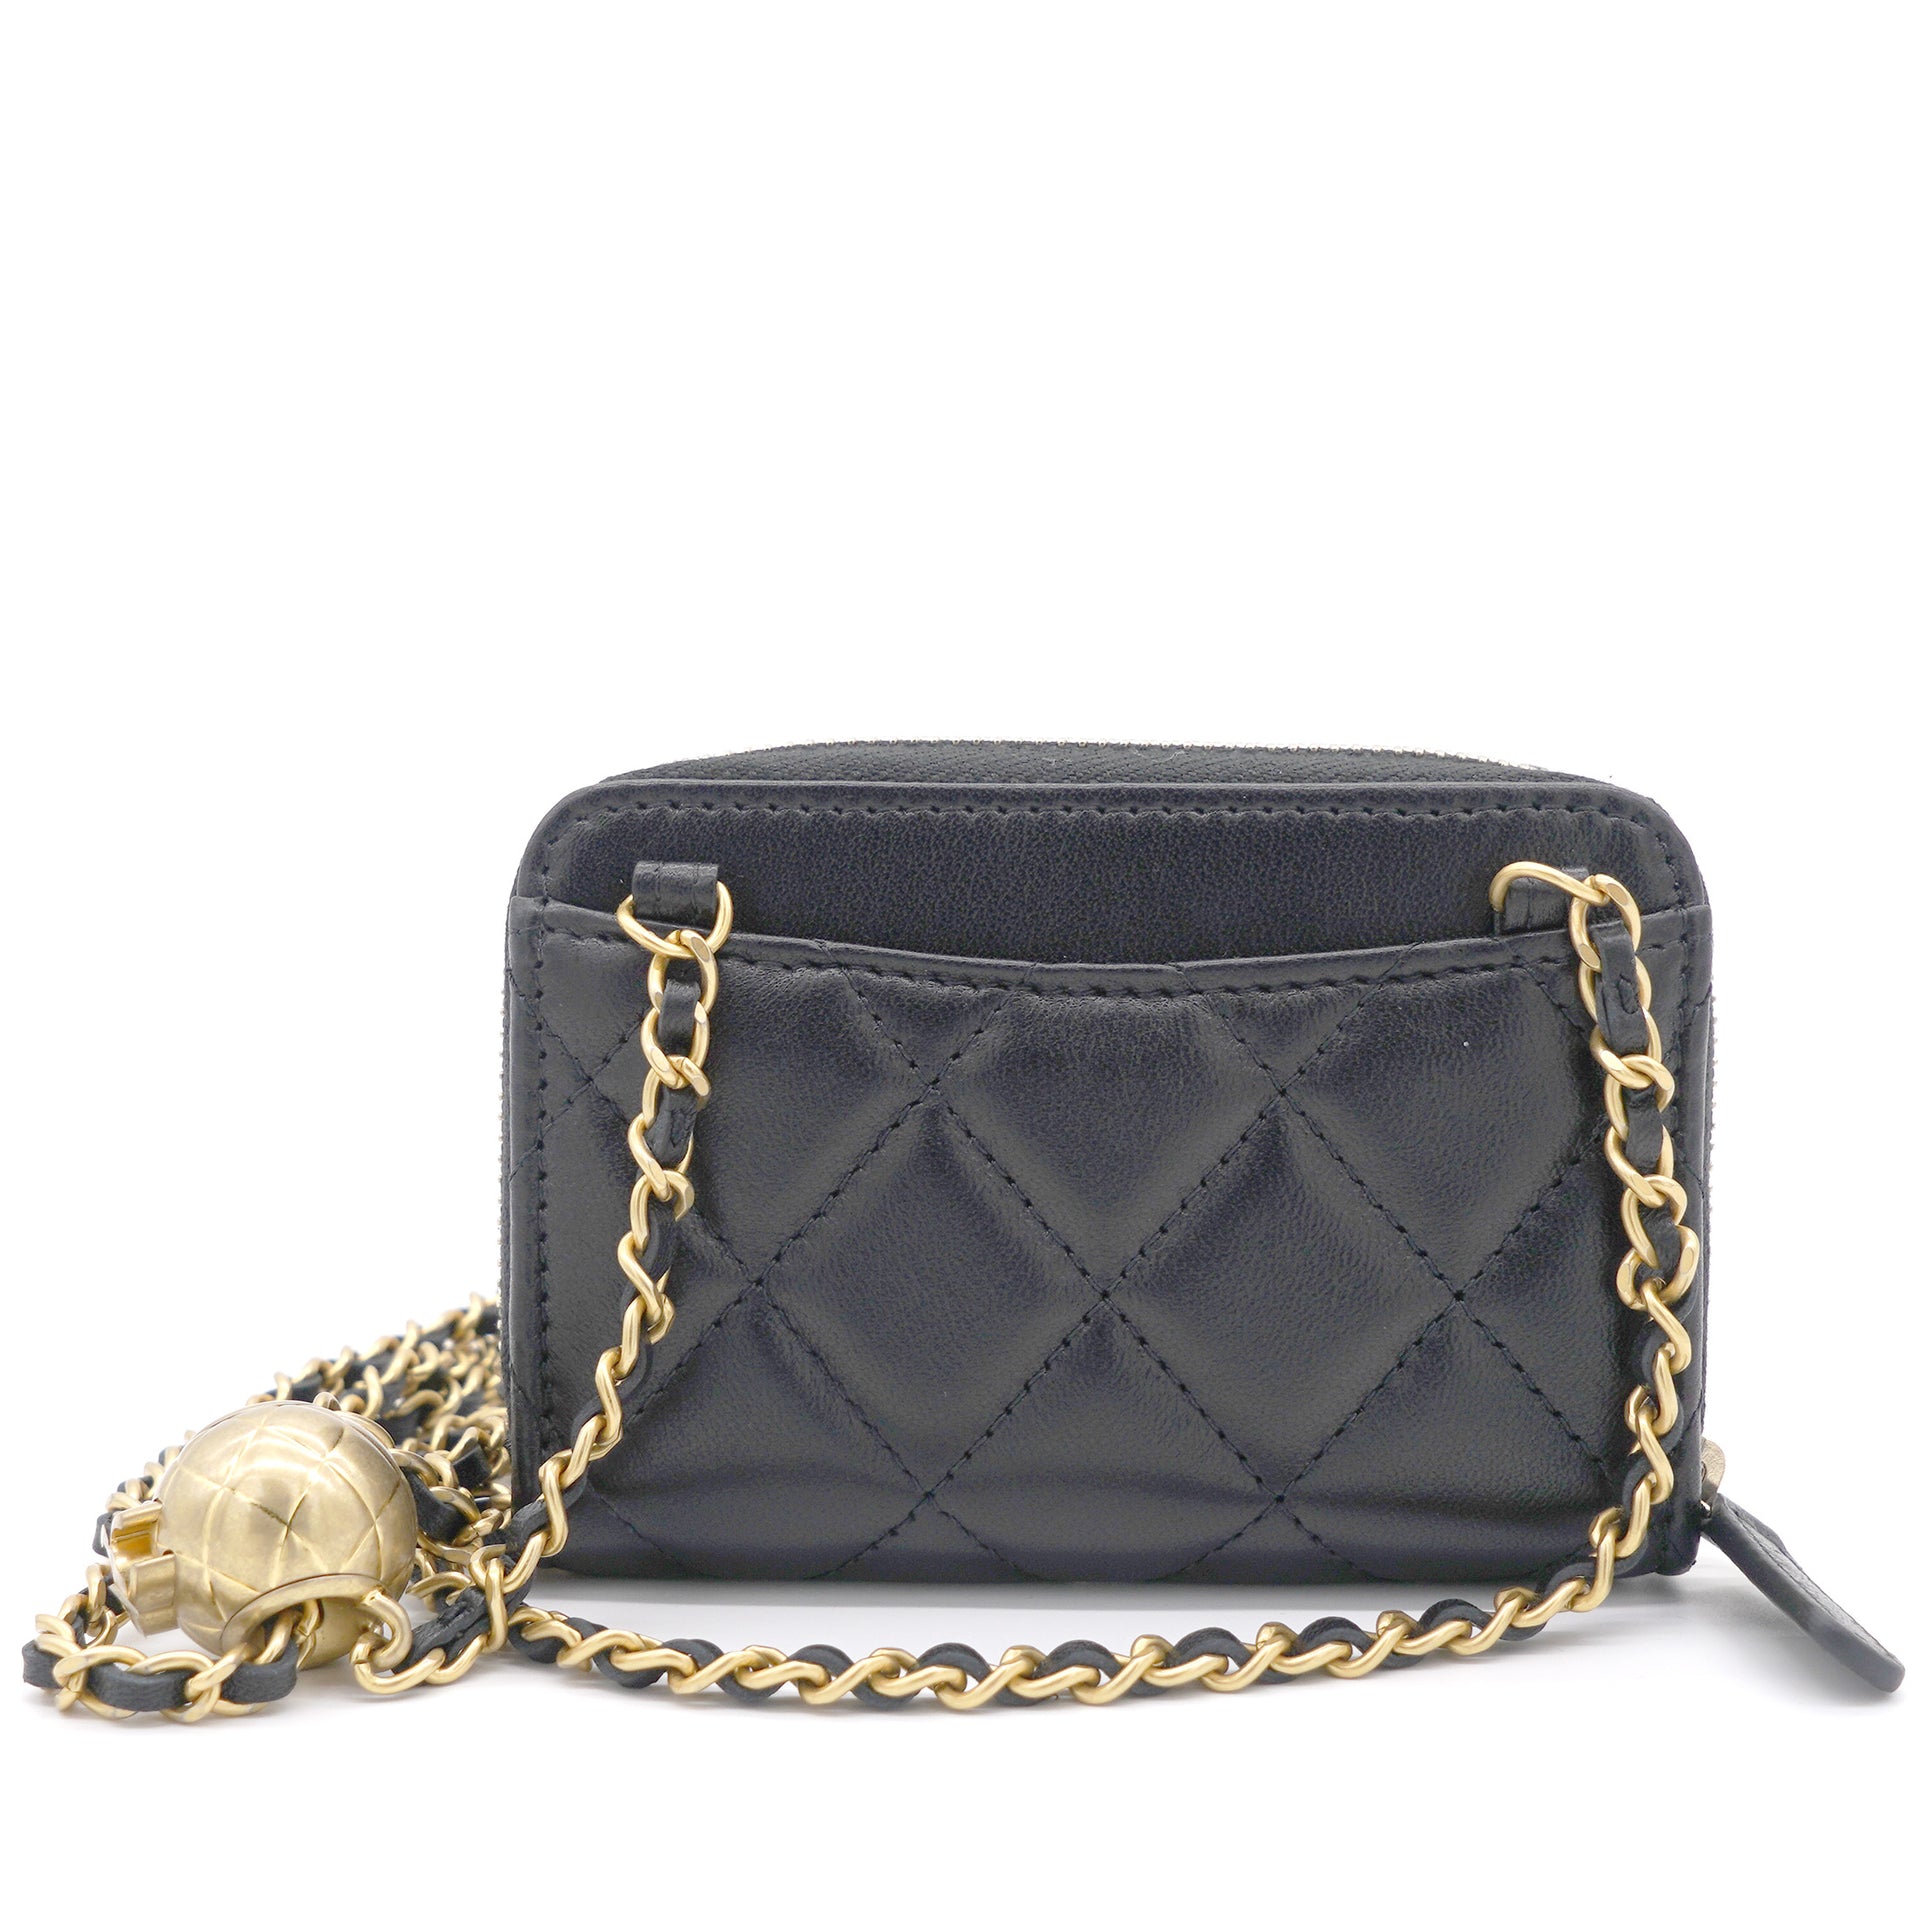 Chanel Black Lambskin Leather CC Zip Around Purse with Gold Ball